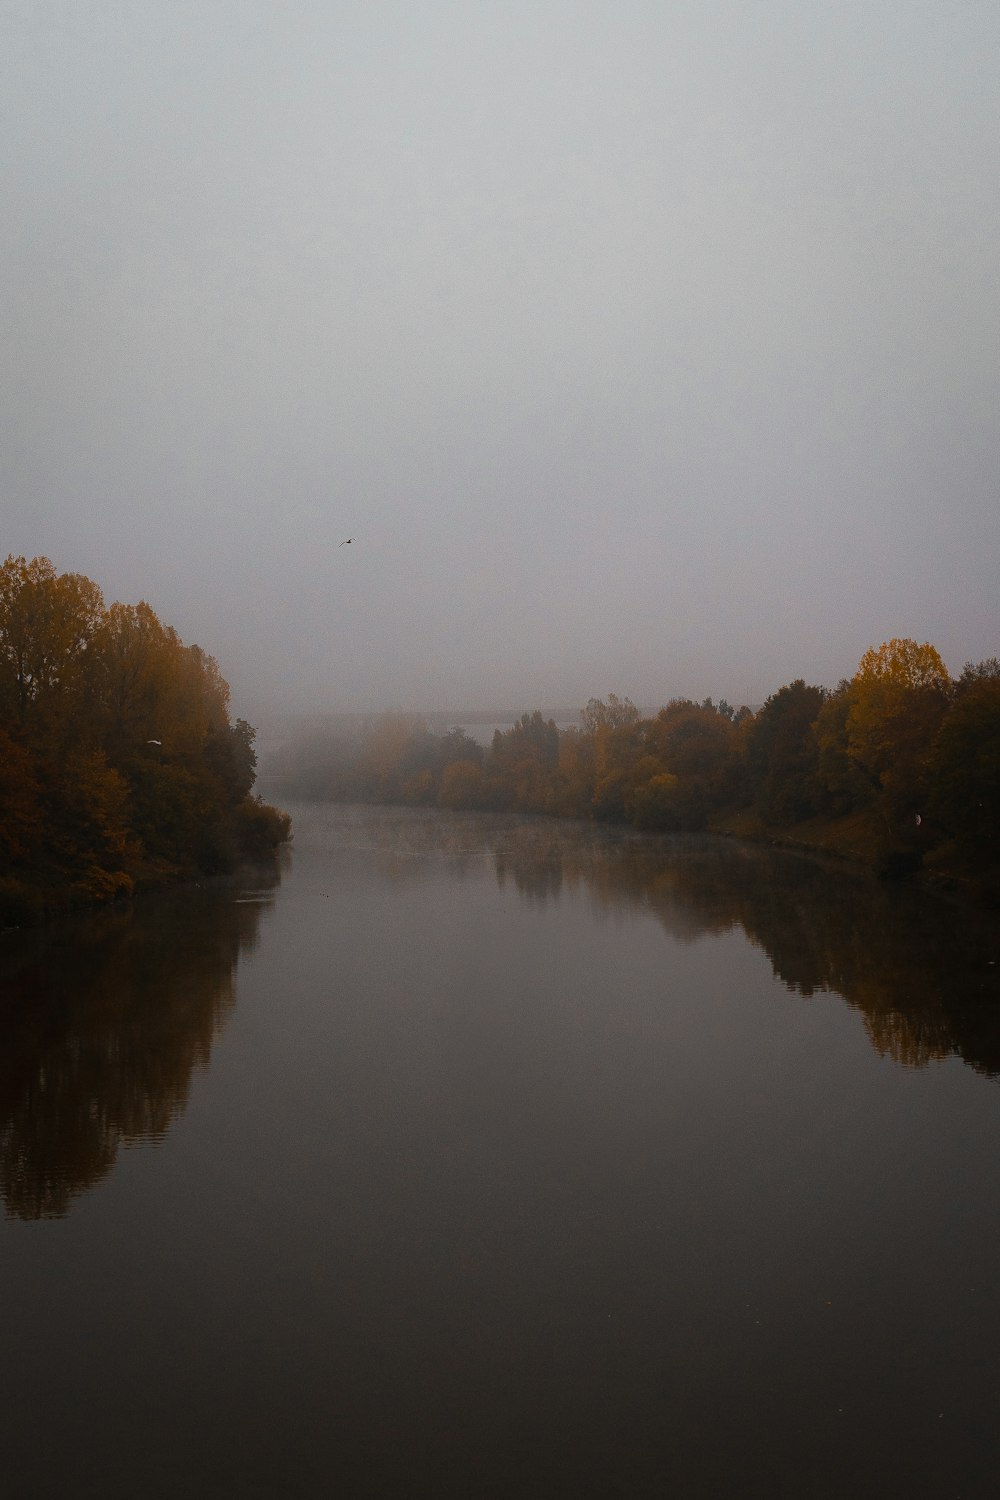 brown trees beside river during foggy weather